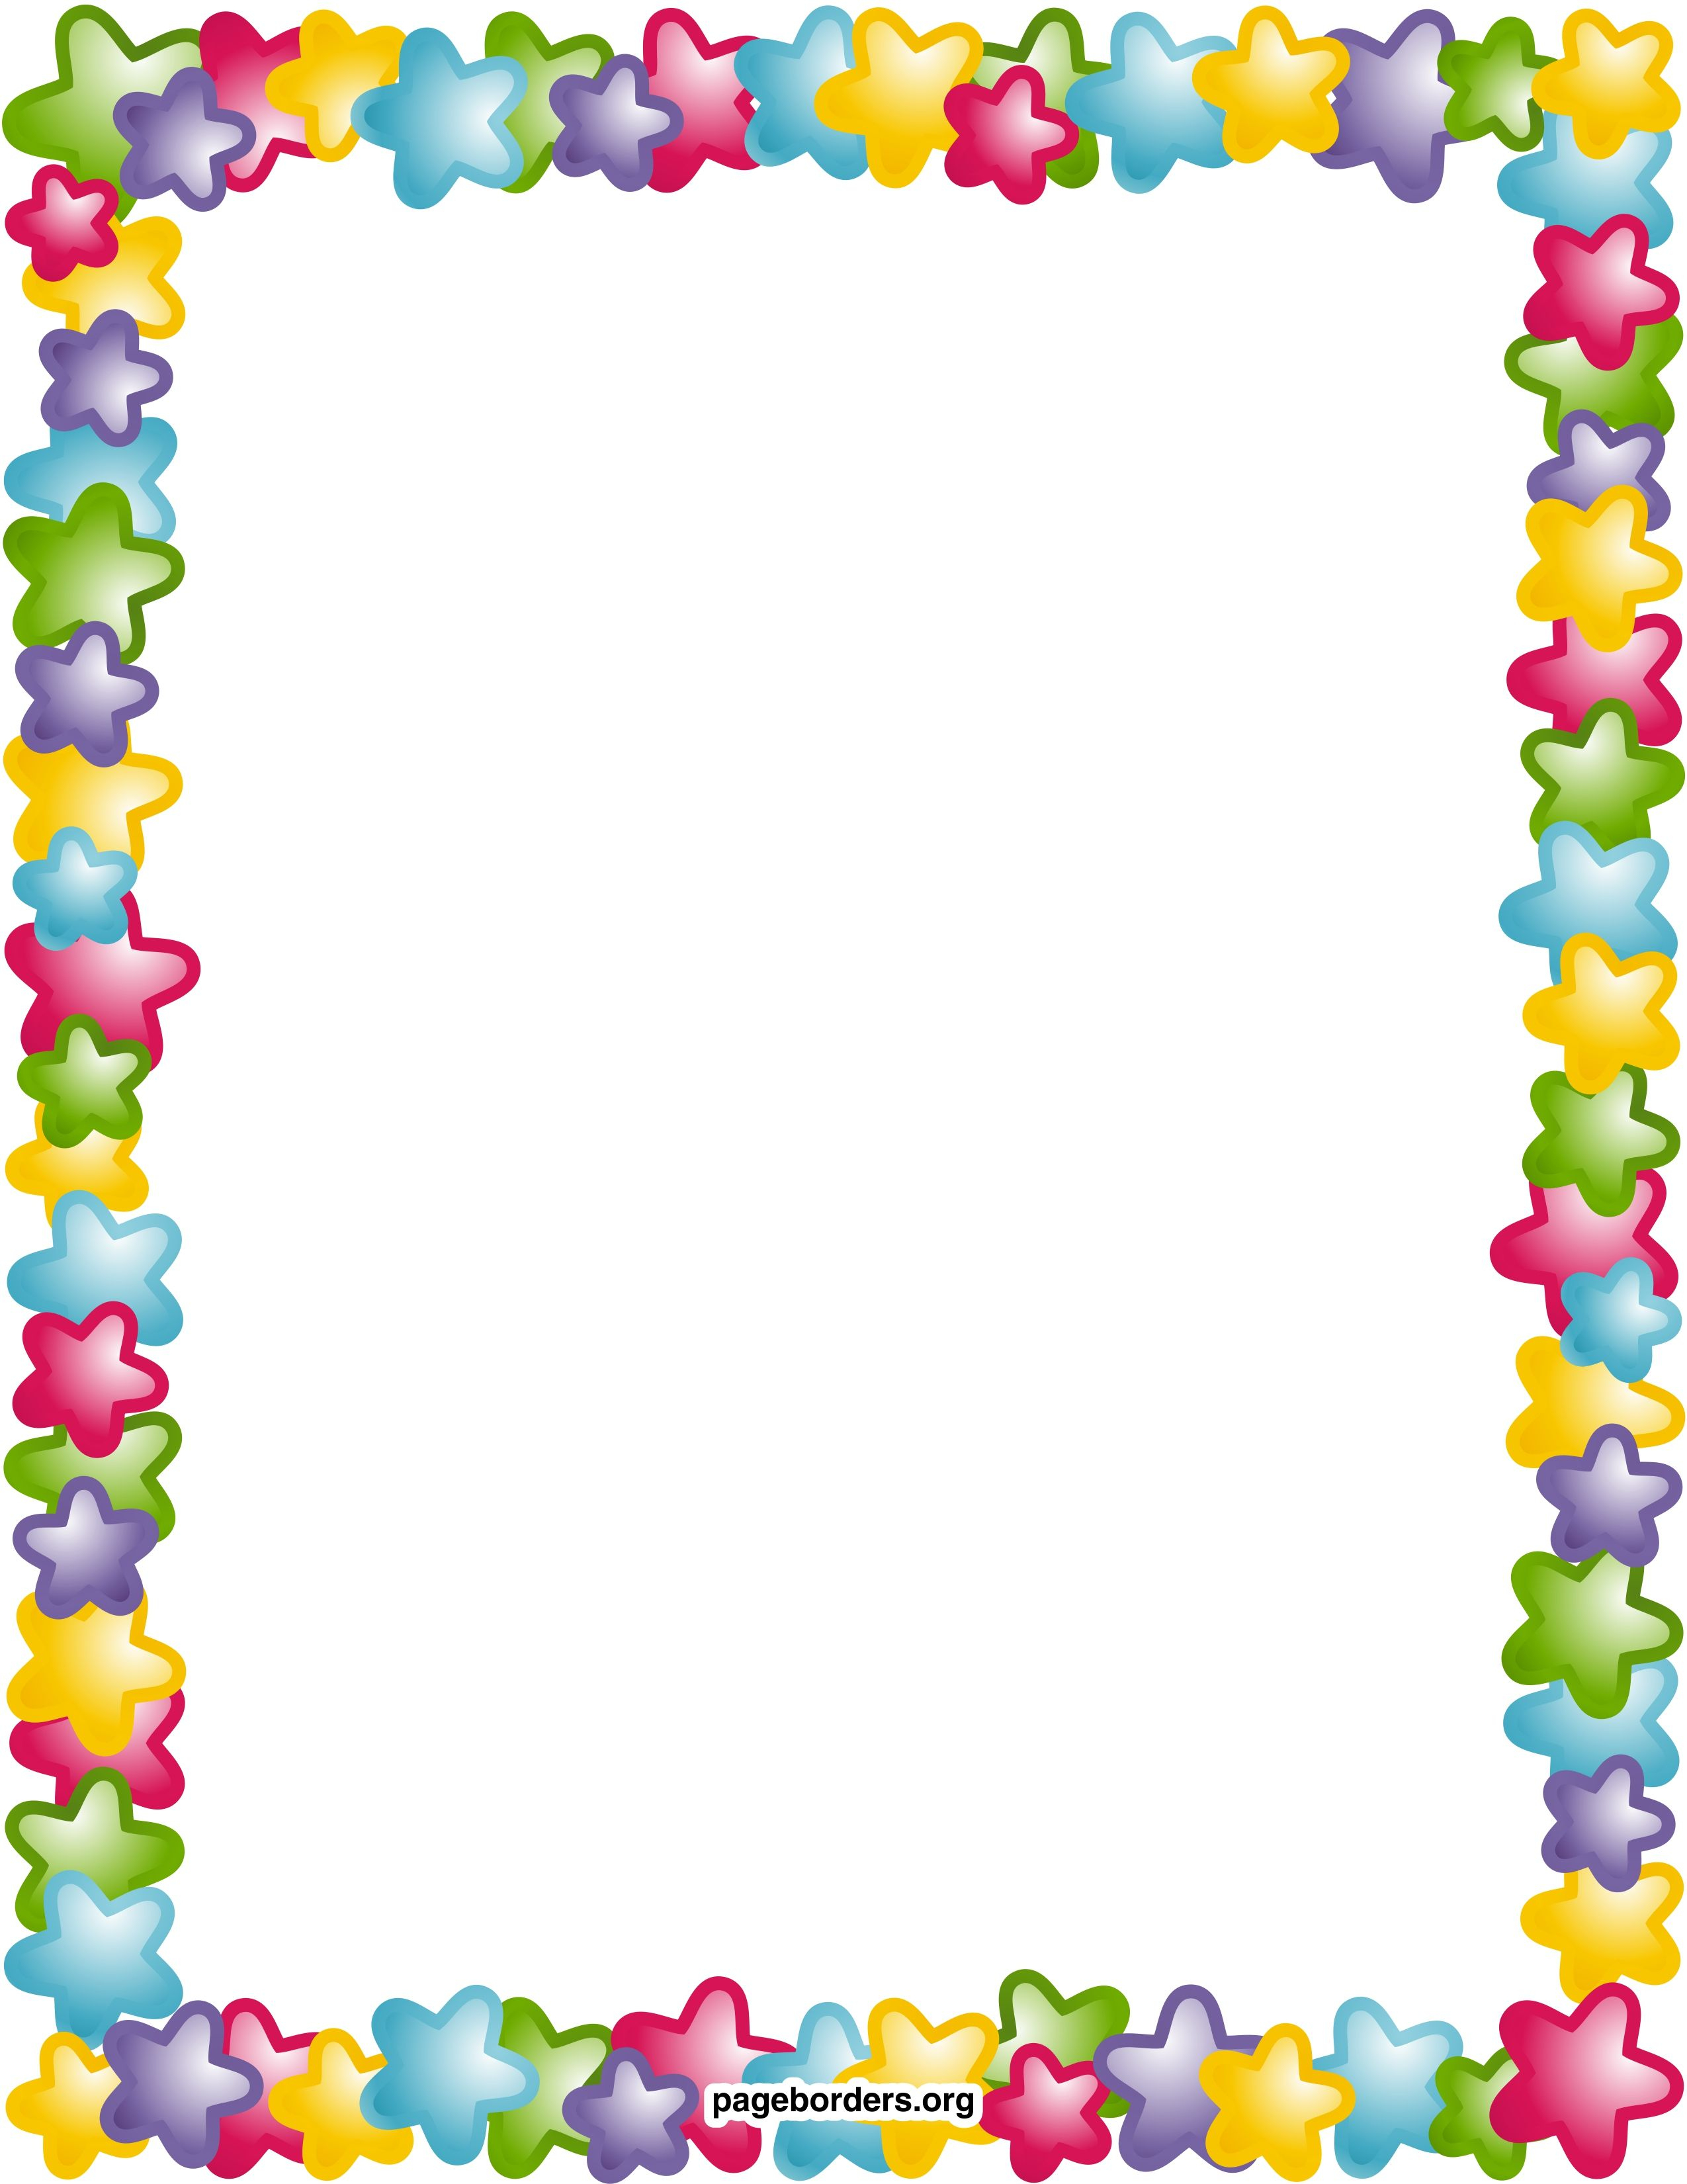 Remarkable Decoration Free Printable Borders And Frames Clip Art - Free Printable Borders For Scrapbooking